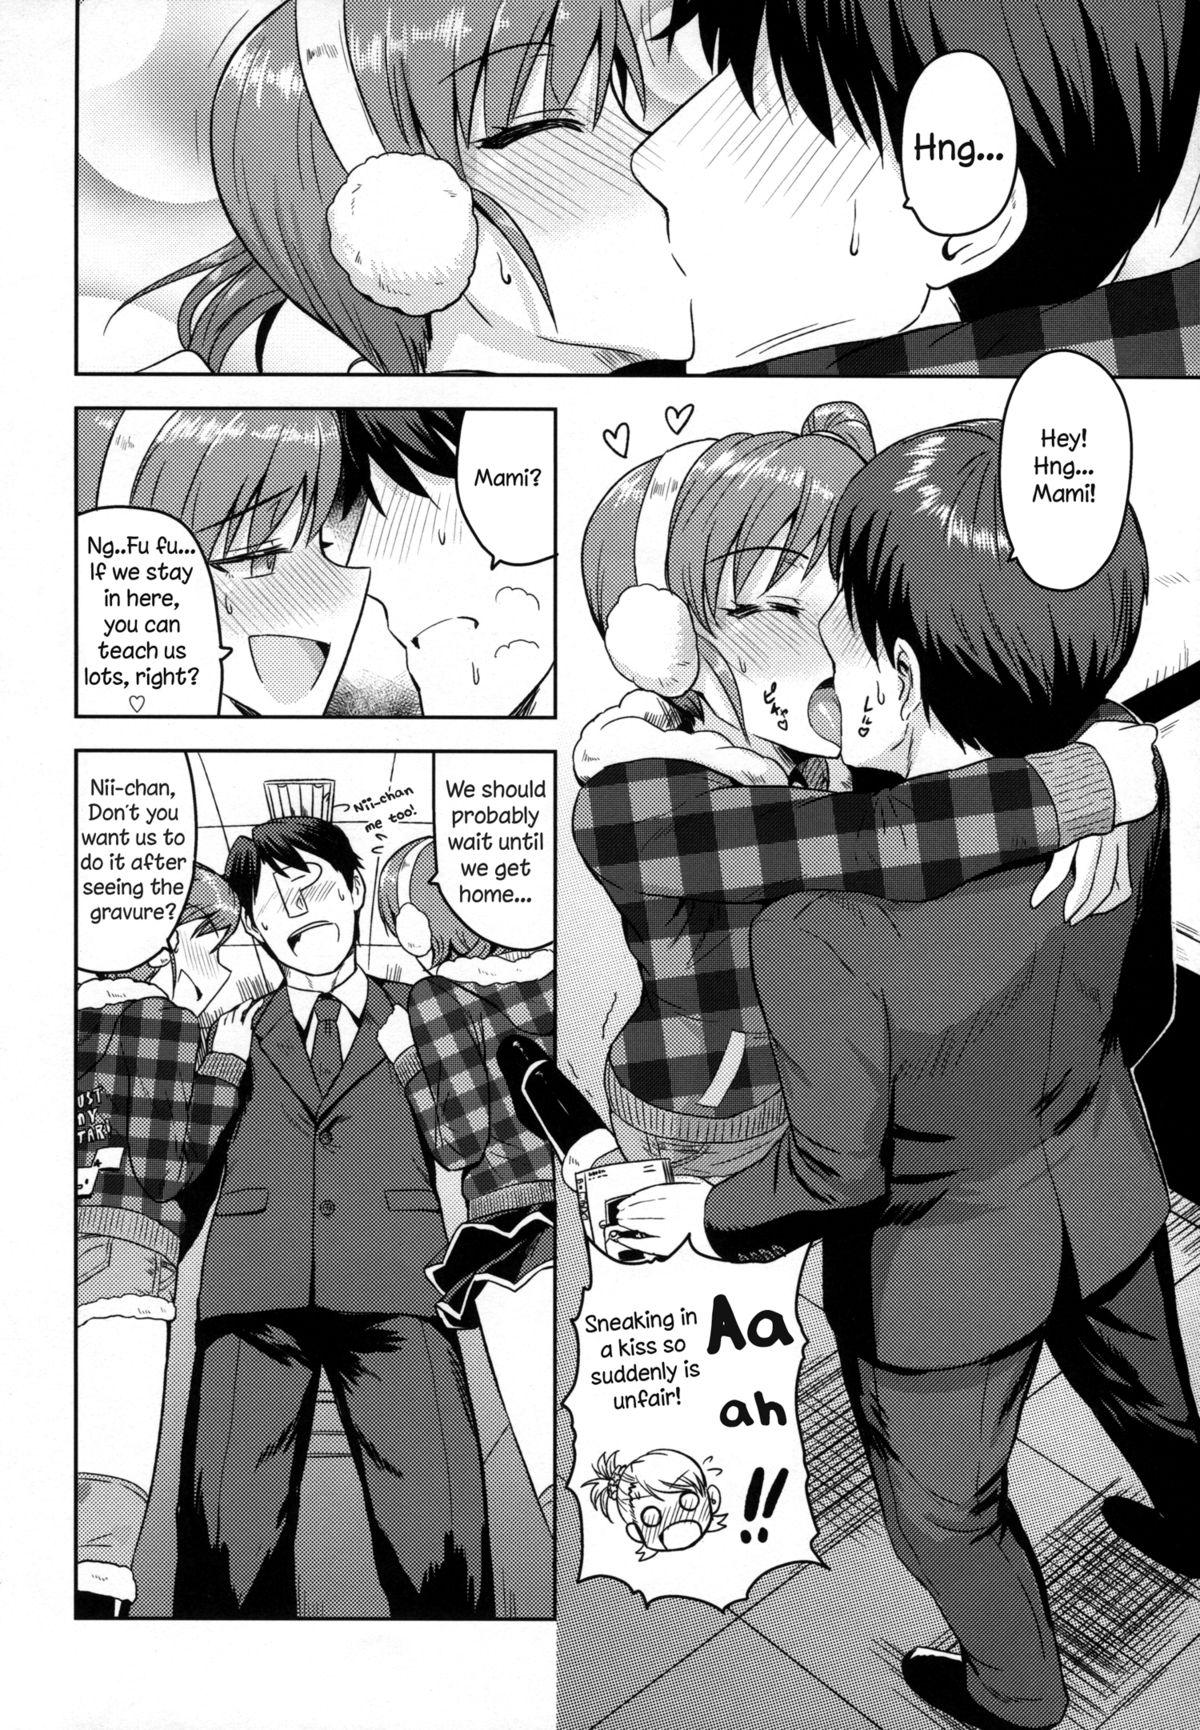 Riding Ami Mami Mind 3 - The idolmaster Blowing - Page 5